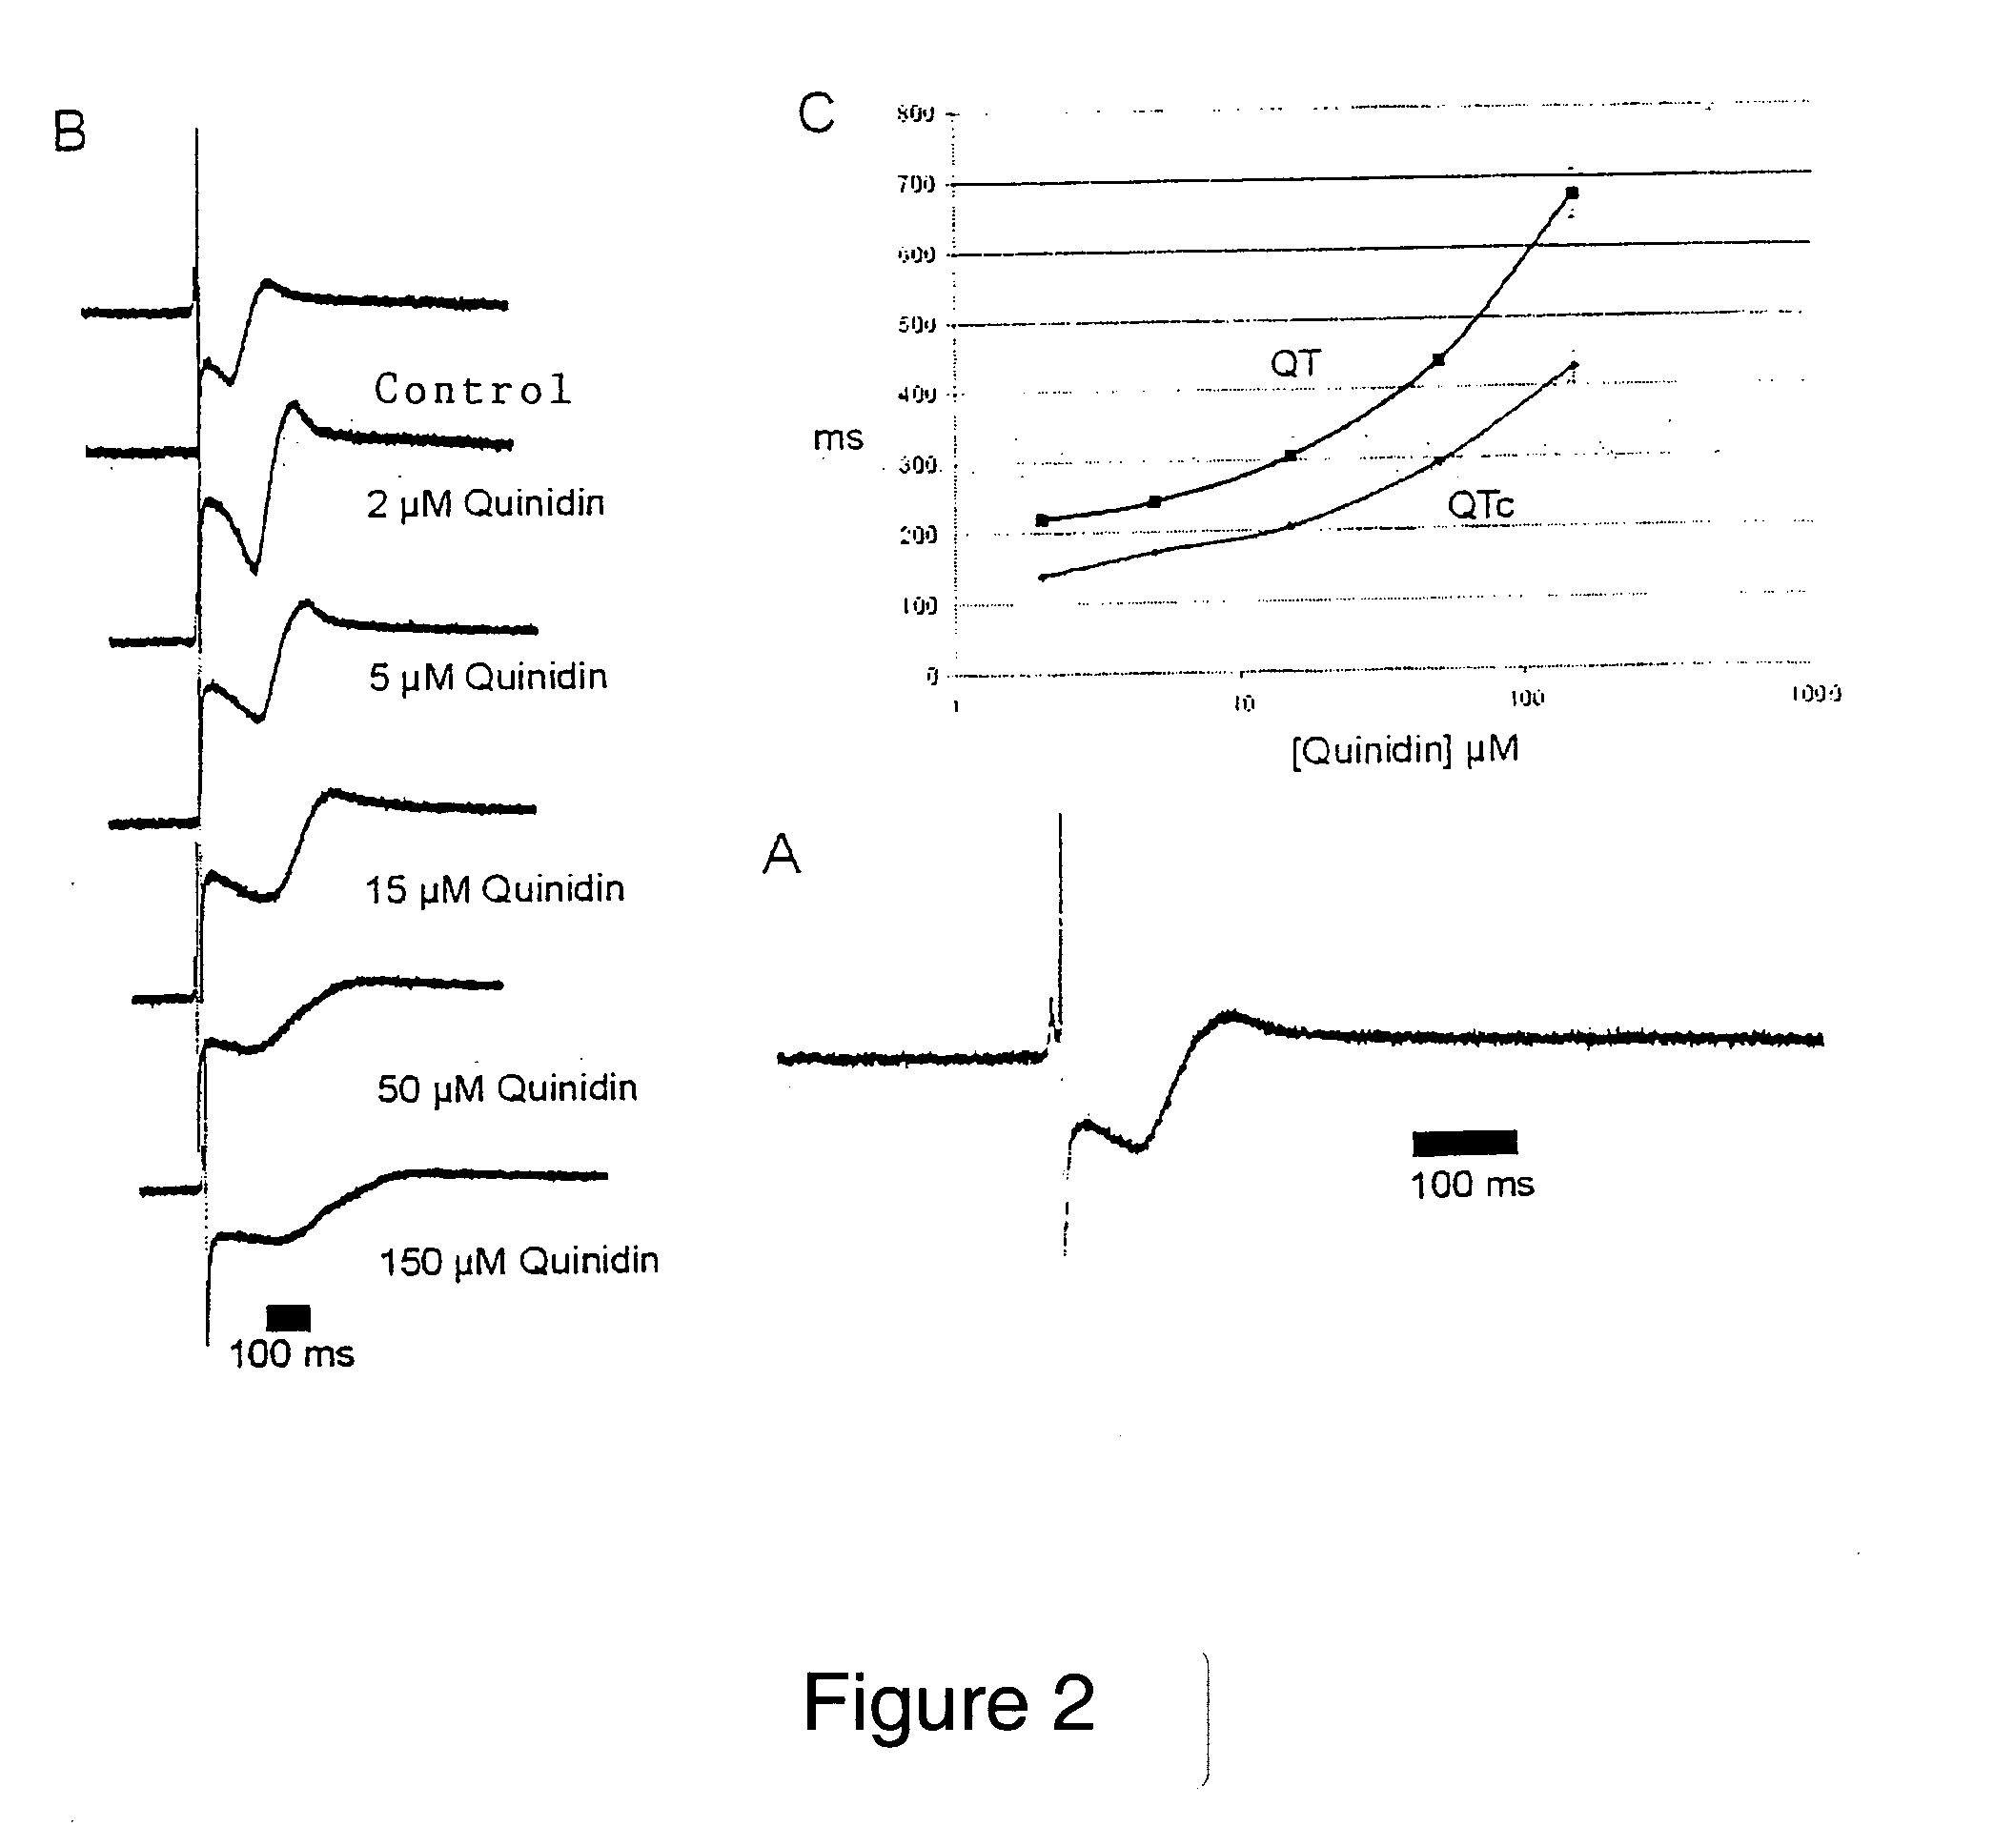 Method for determining the influence of a test substance on the heart activity of a vertebrate